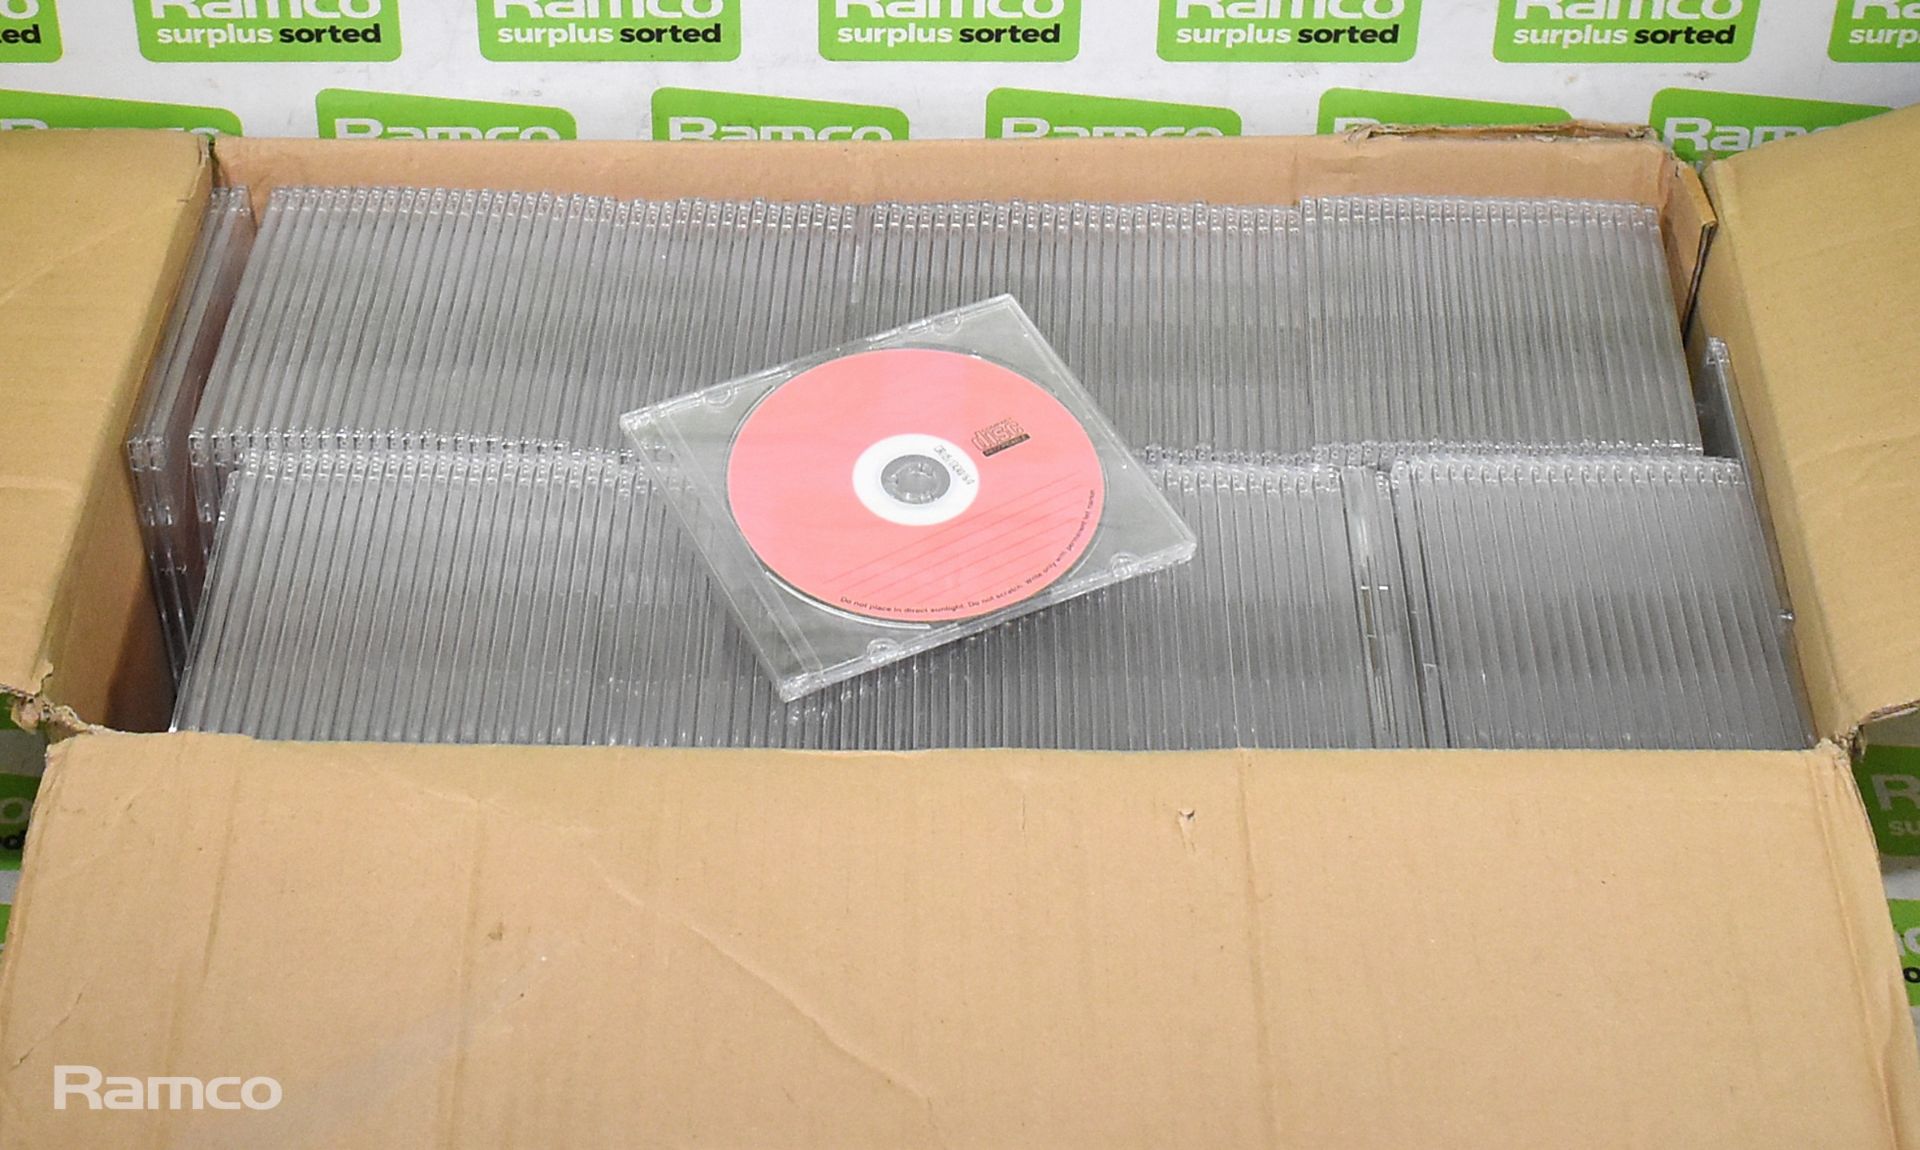 Recordable compact discs - approx 180 - Image 2 of 4